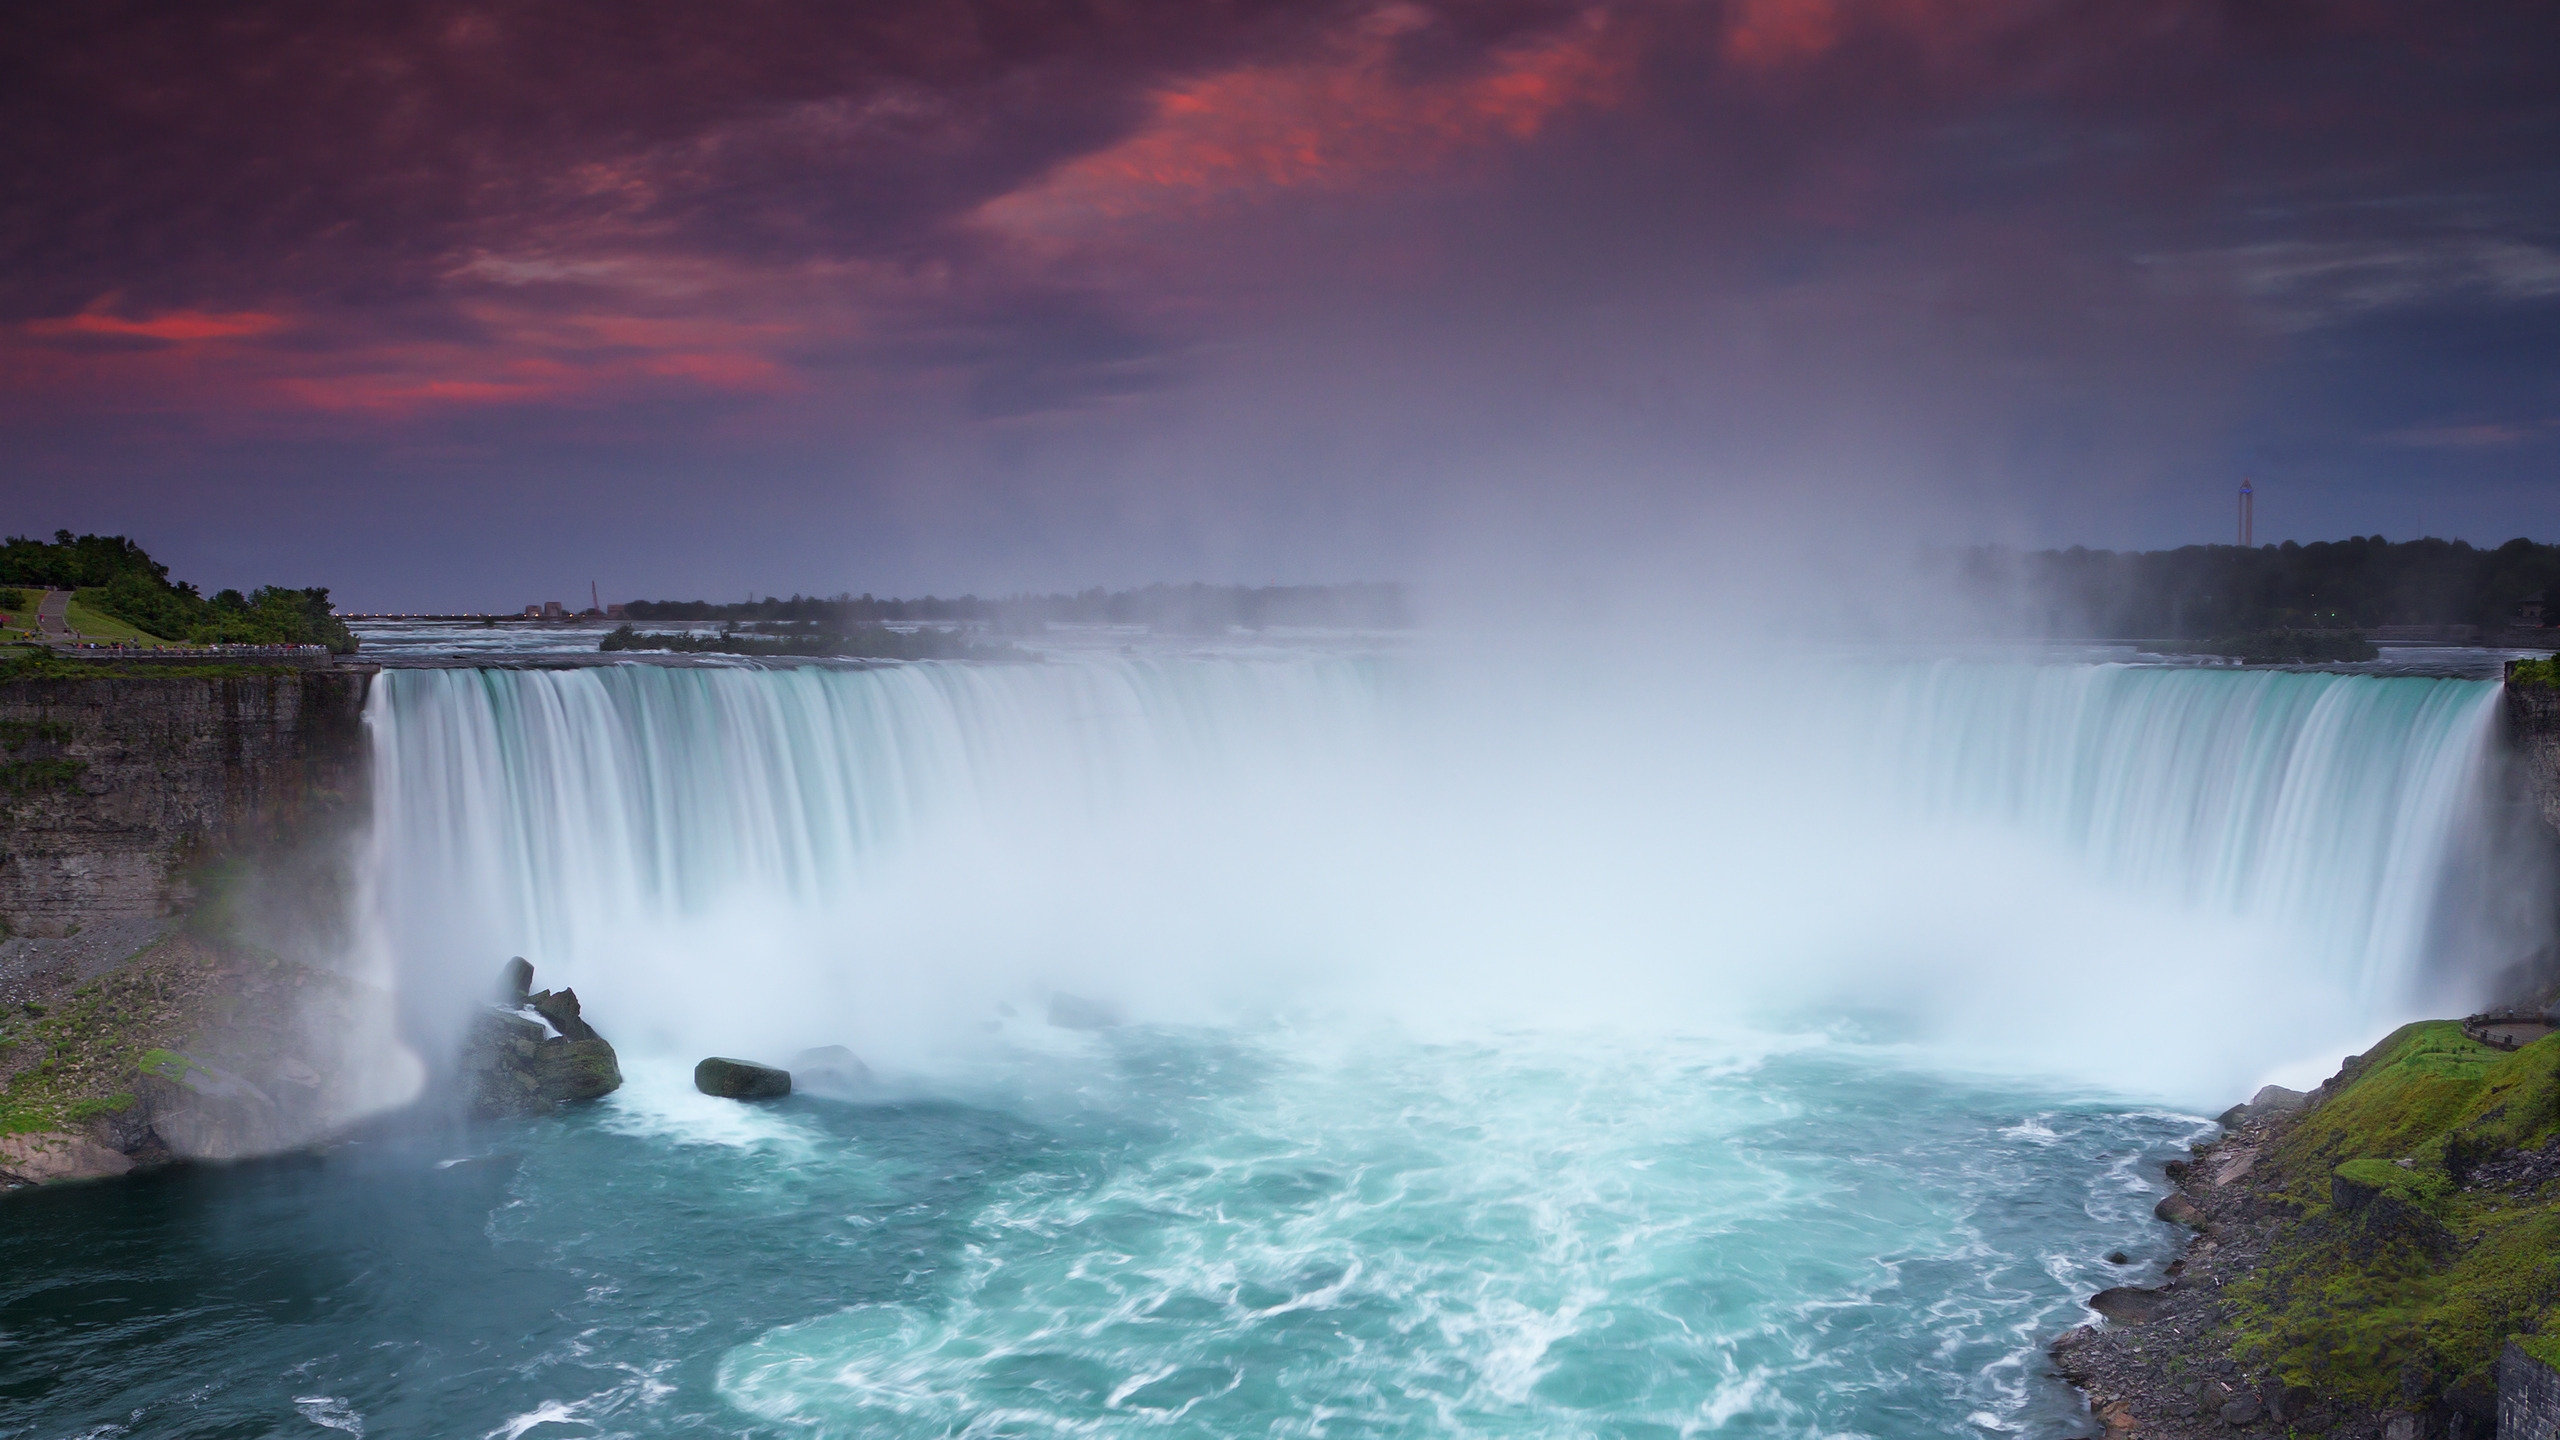 The Falls at Sunset for 2560x1440 HDTV resolution